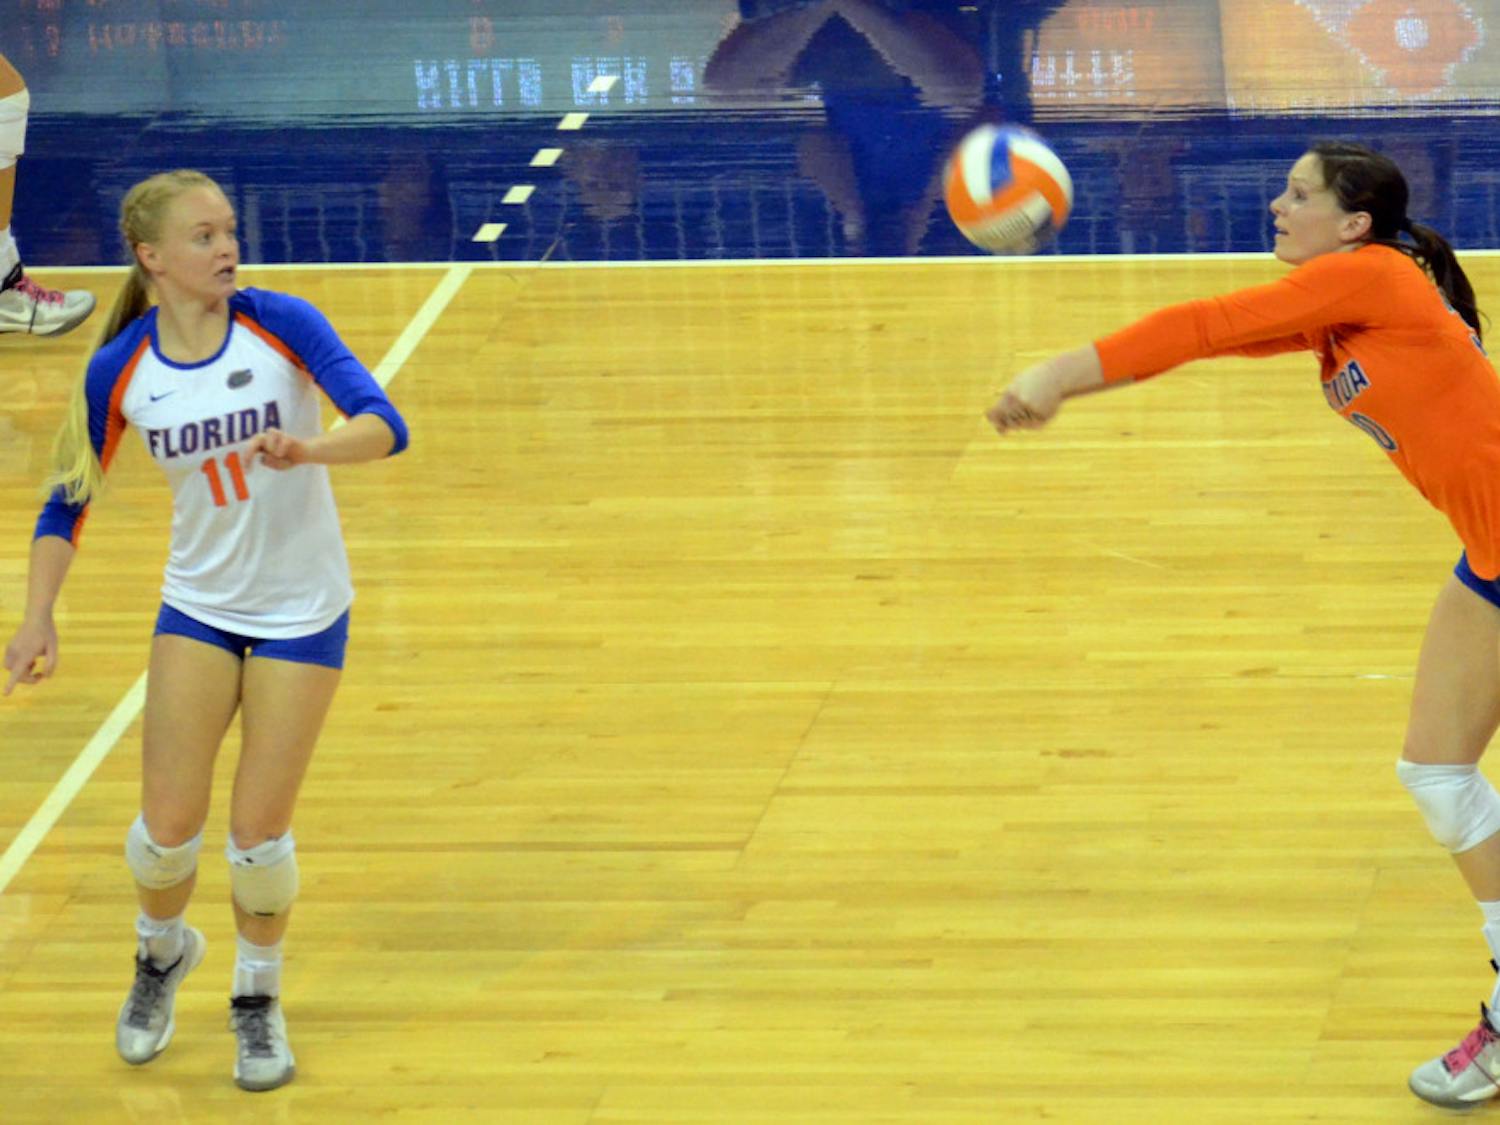 Holly Pole digs a ball during Florida's 3-0 win against South Carolina on Wednesday in the O'Connell Center.